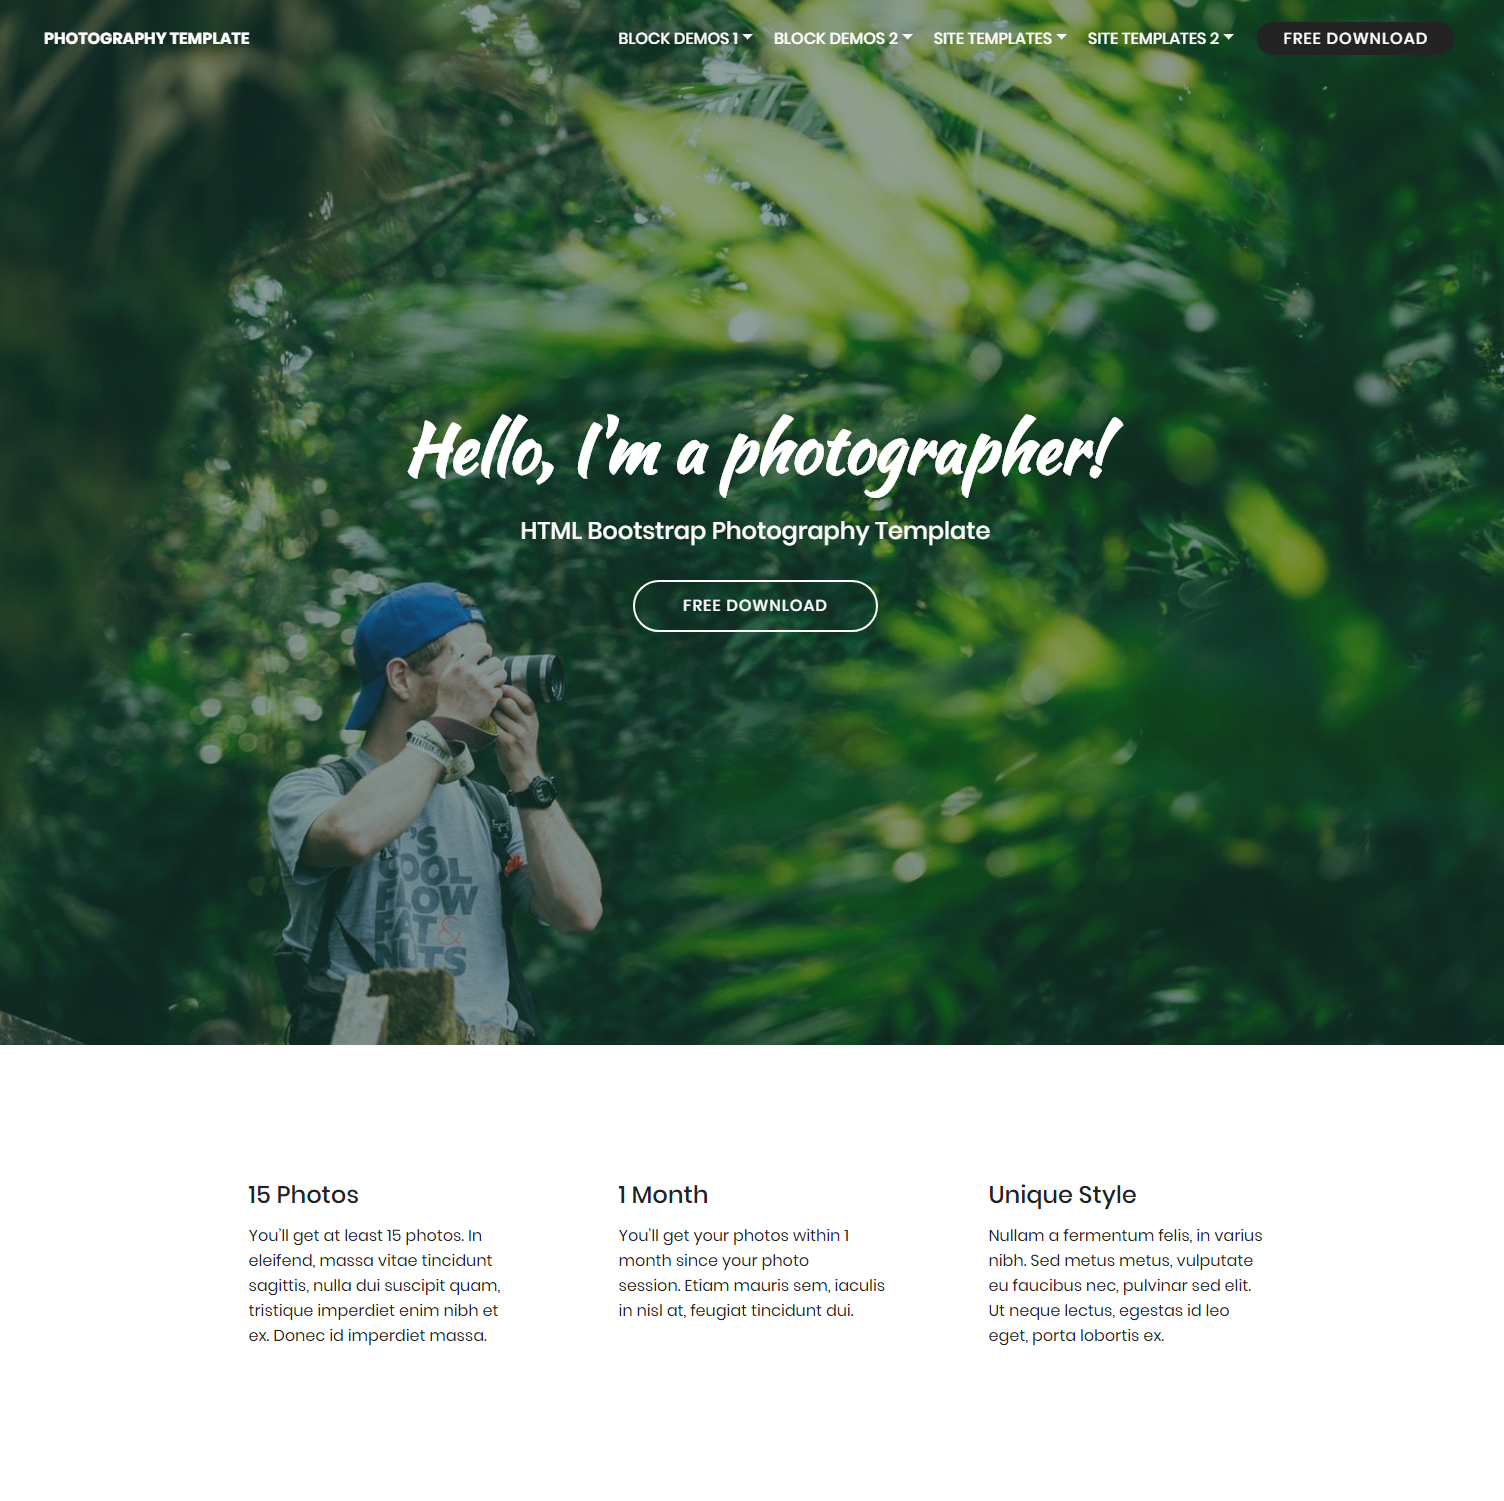 Free Download Bootstrap Photography Templates